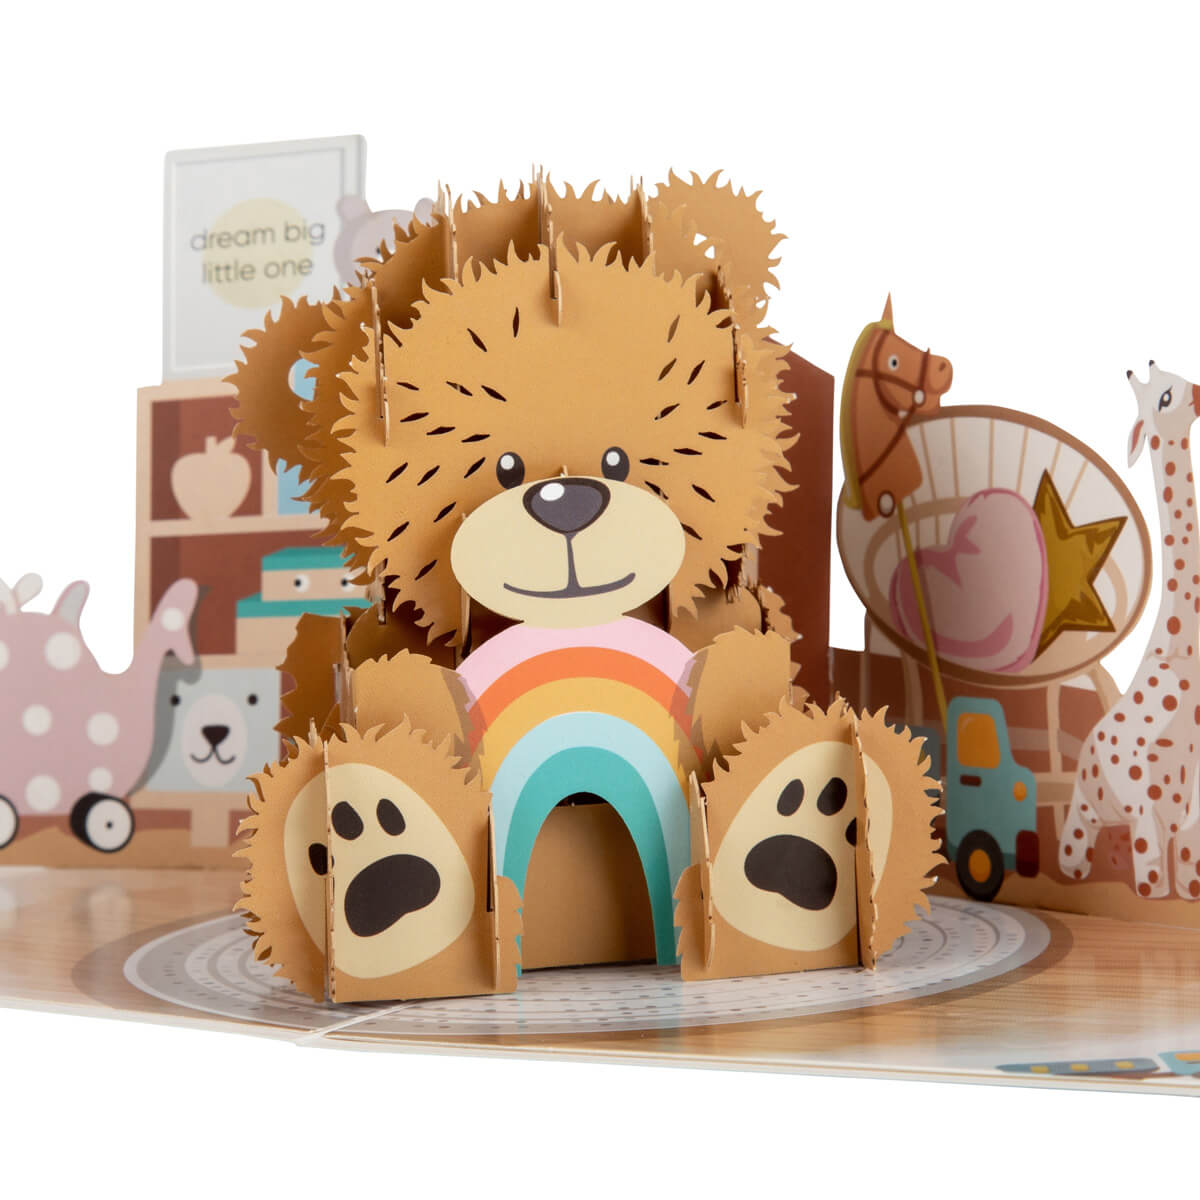 Close up image of gender neutral new baby bear pop up card featuring a 3D teddy bear holding a colourful rainbow and a nursery scene behind the bear,